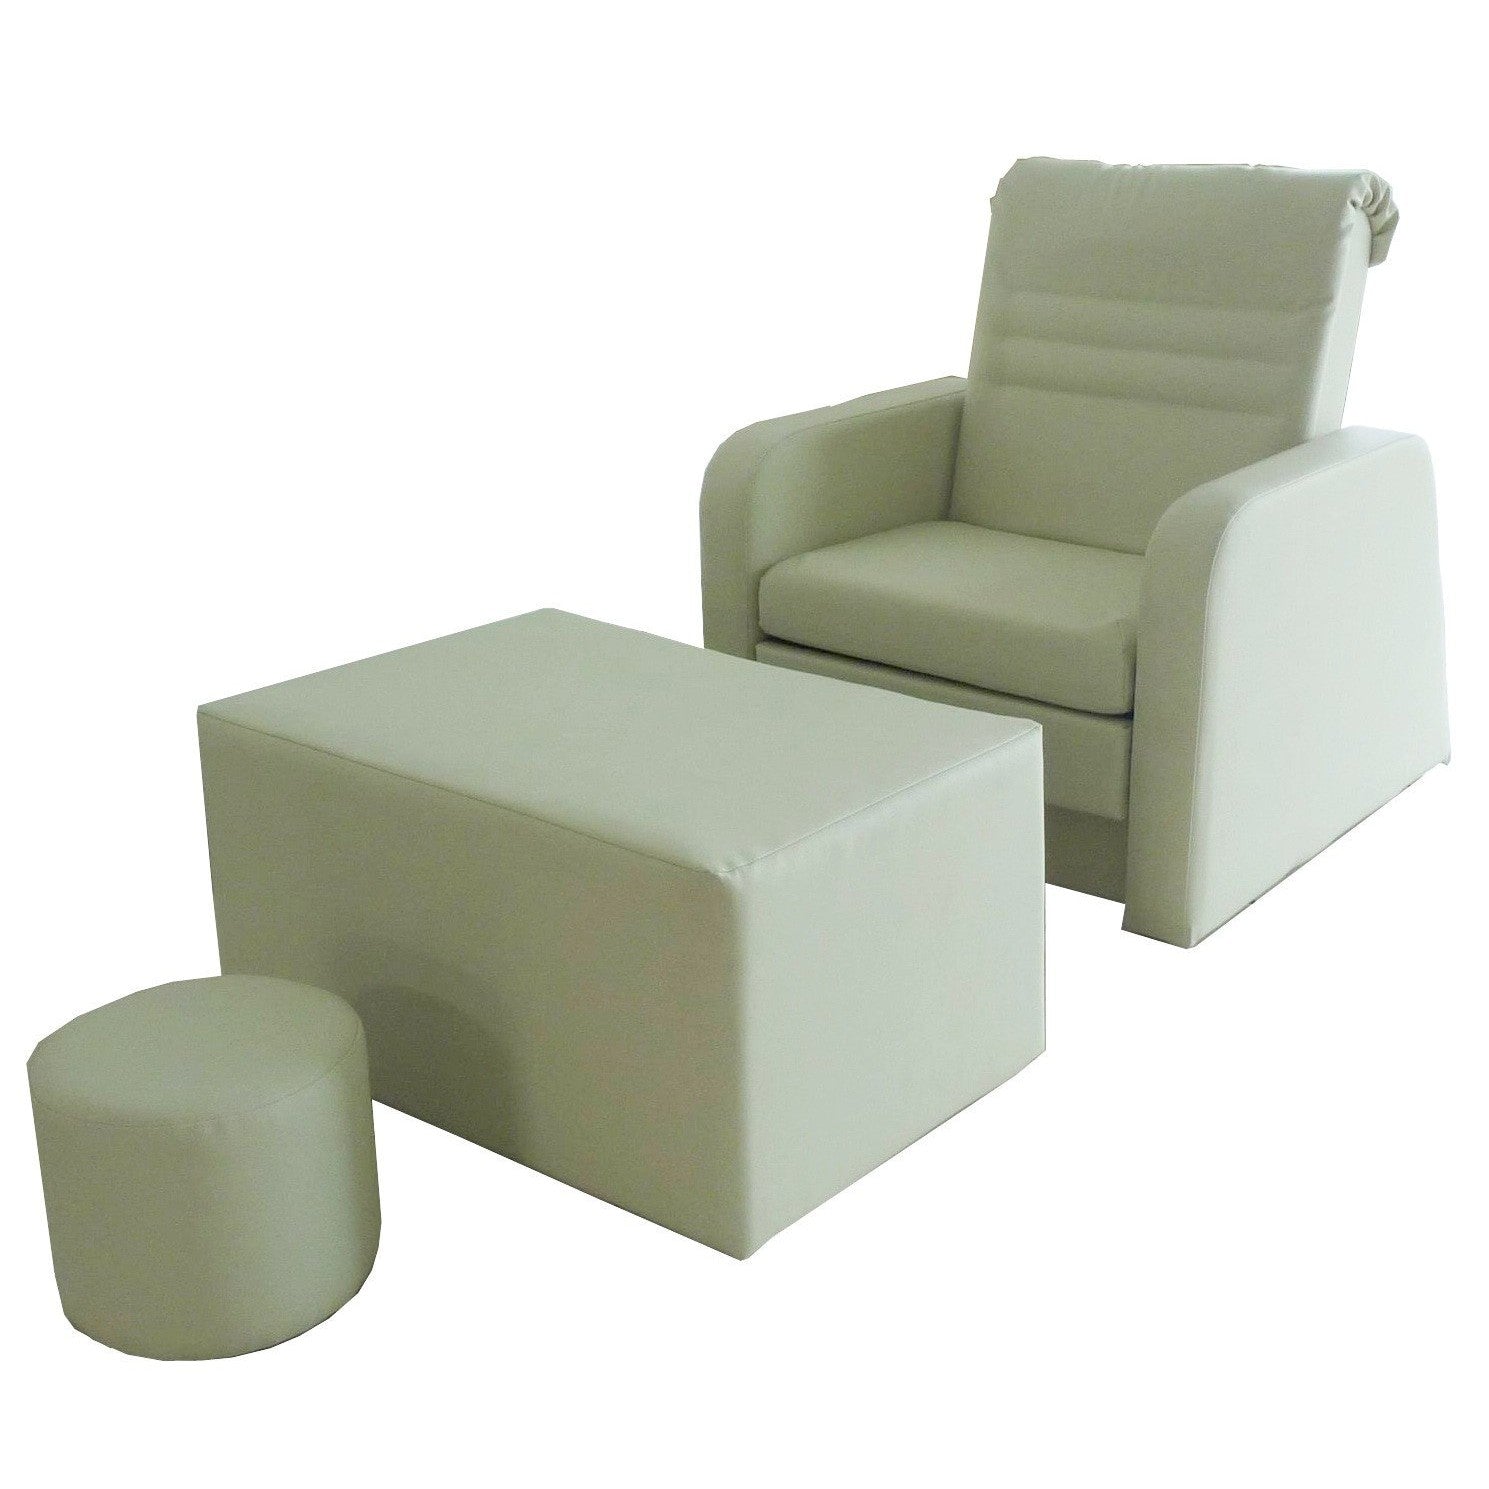 Touch America Destiny/Harmony Foot Massage Pedicure Chair Set Pedicure & Spa Chairs - ChairsThatGive